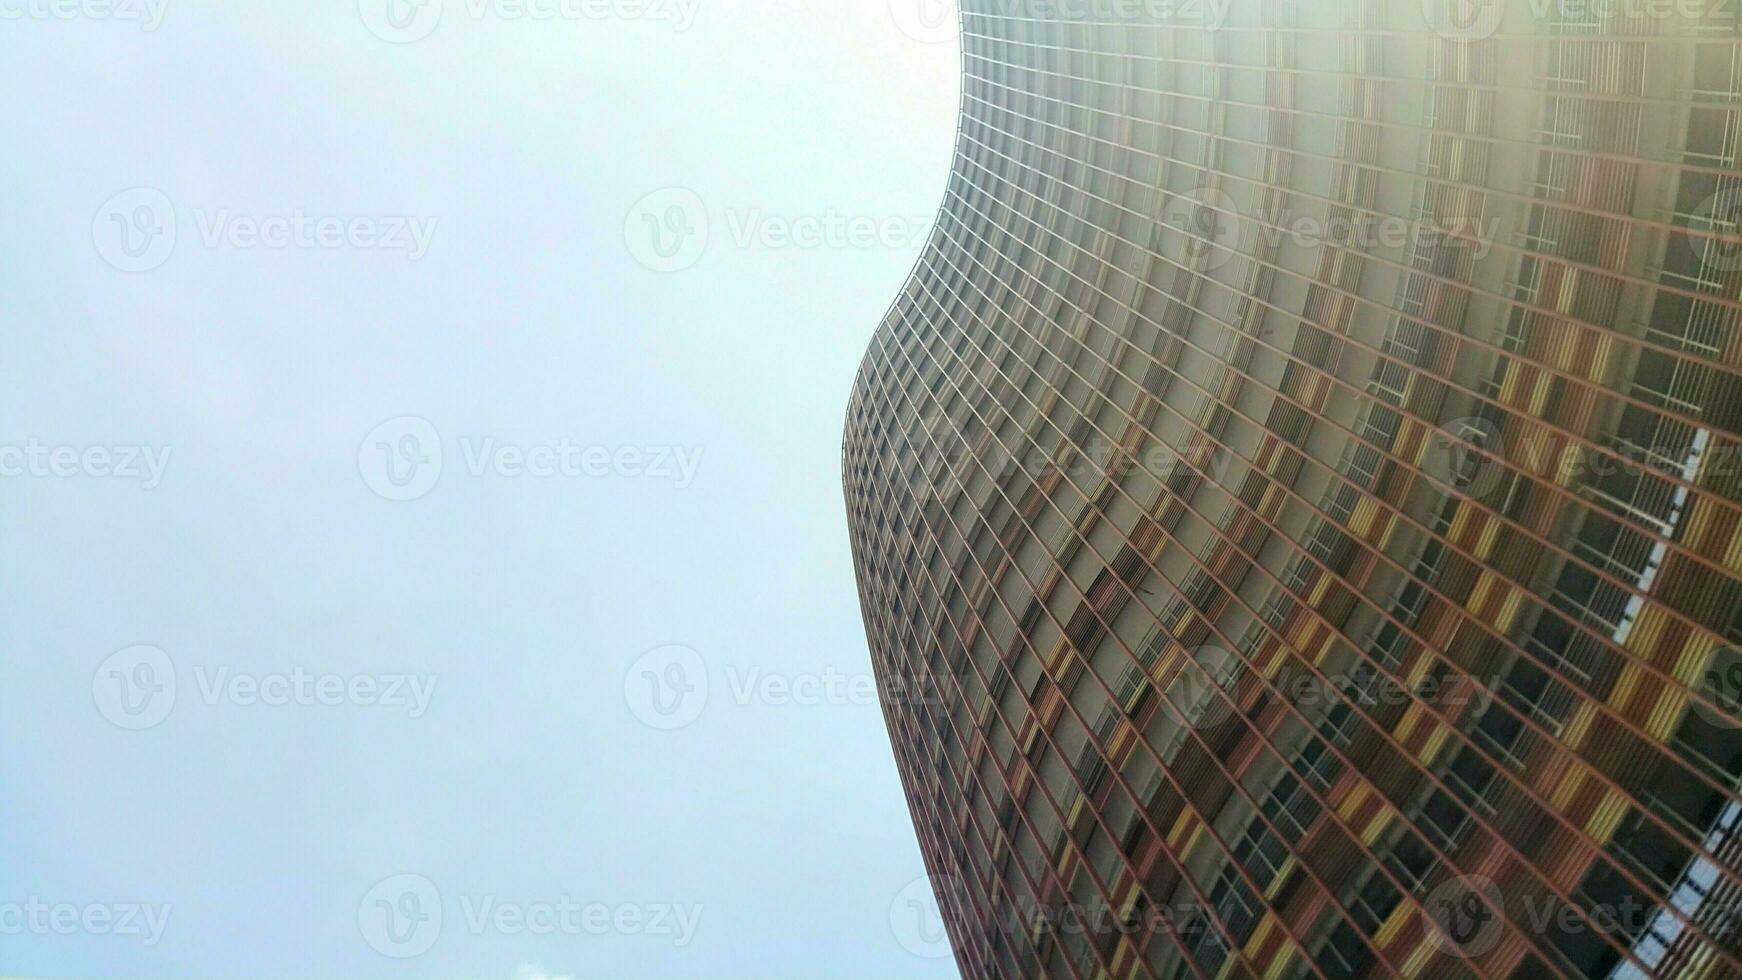 Bottom view of modern skyscrapers in business district against blue sky. Looking up at business buildings in downtown. photo